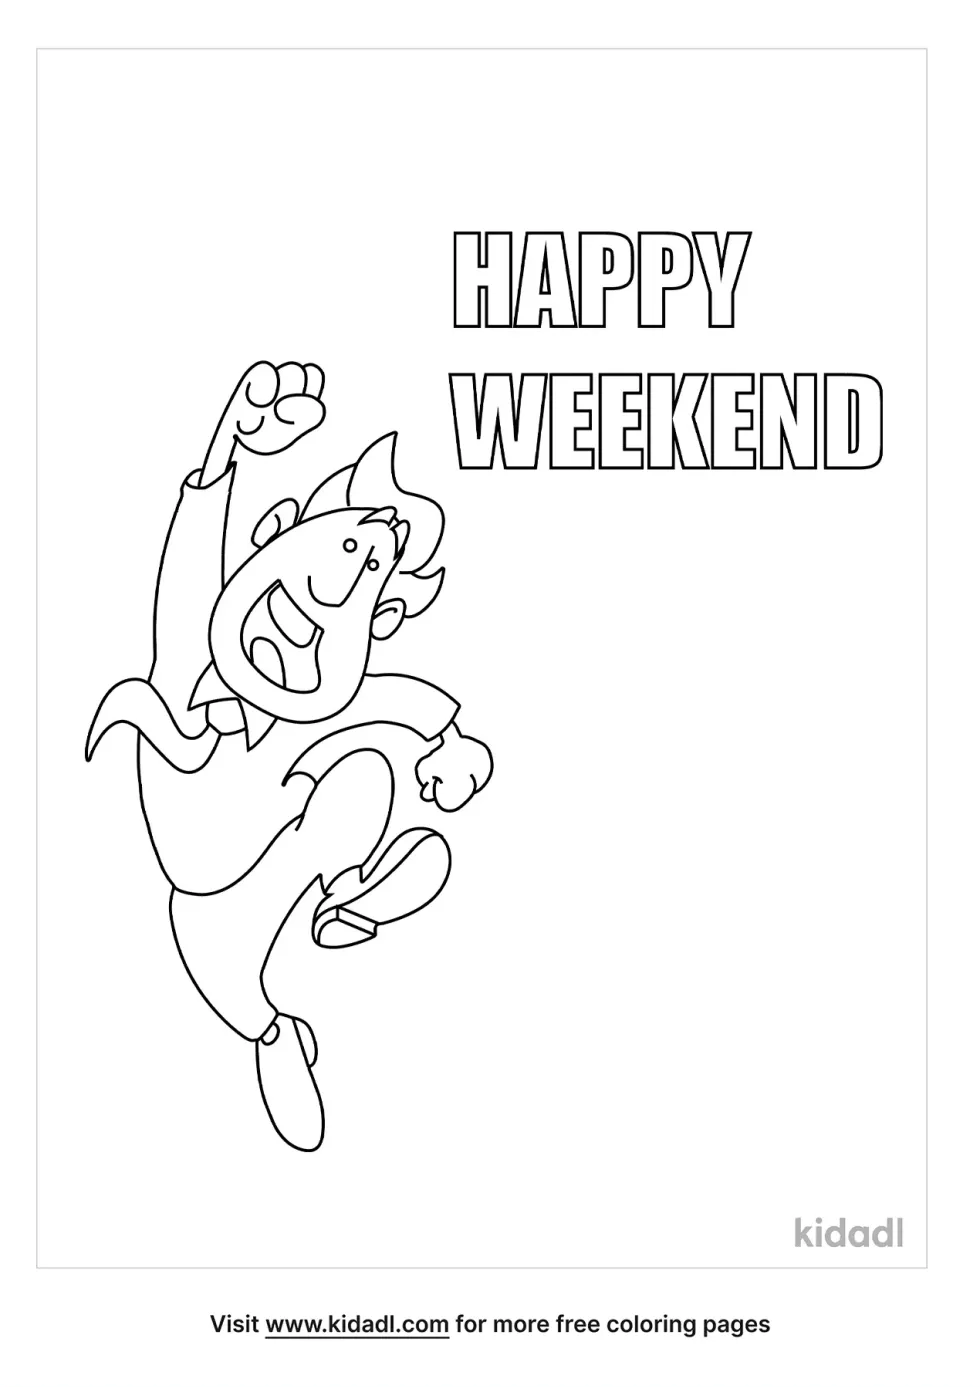 Happy Weekend Coloring Page